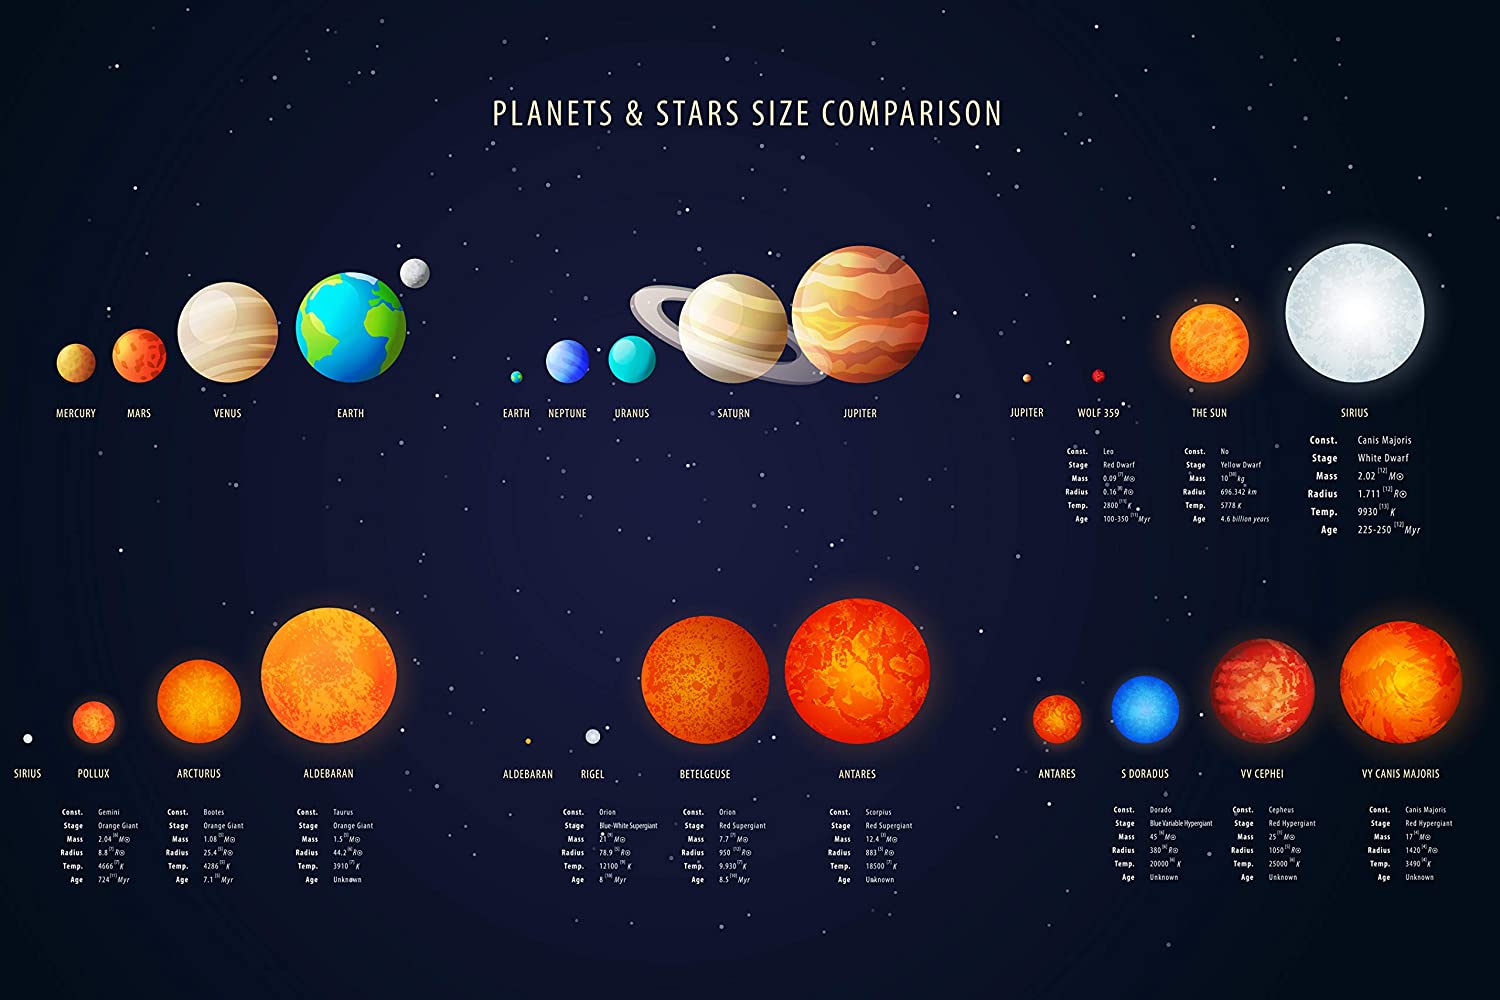 Amazon.com: Planets and Starts Size Comparison Poster ...